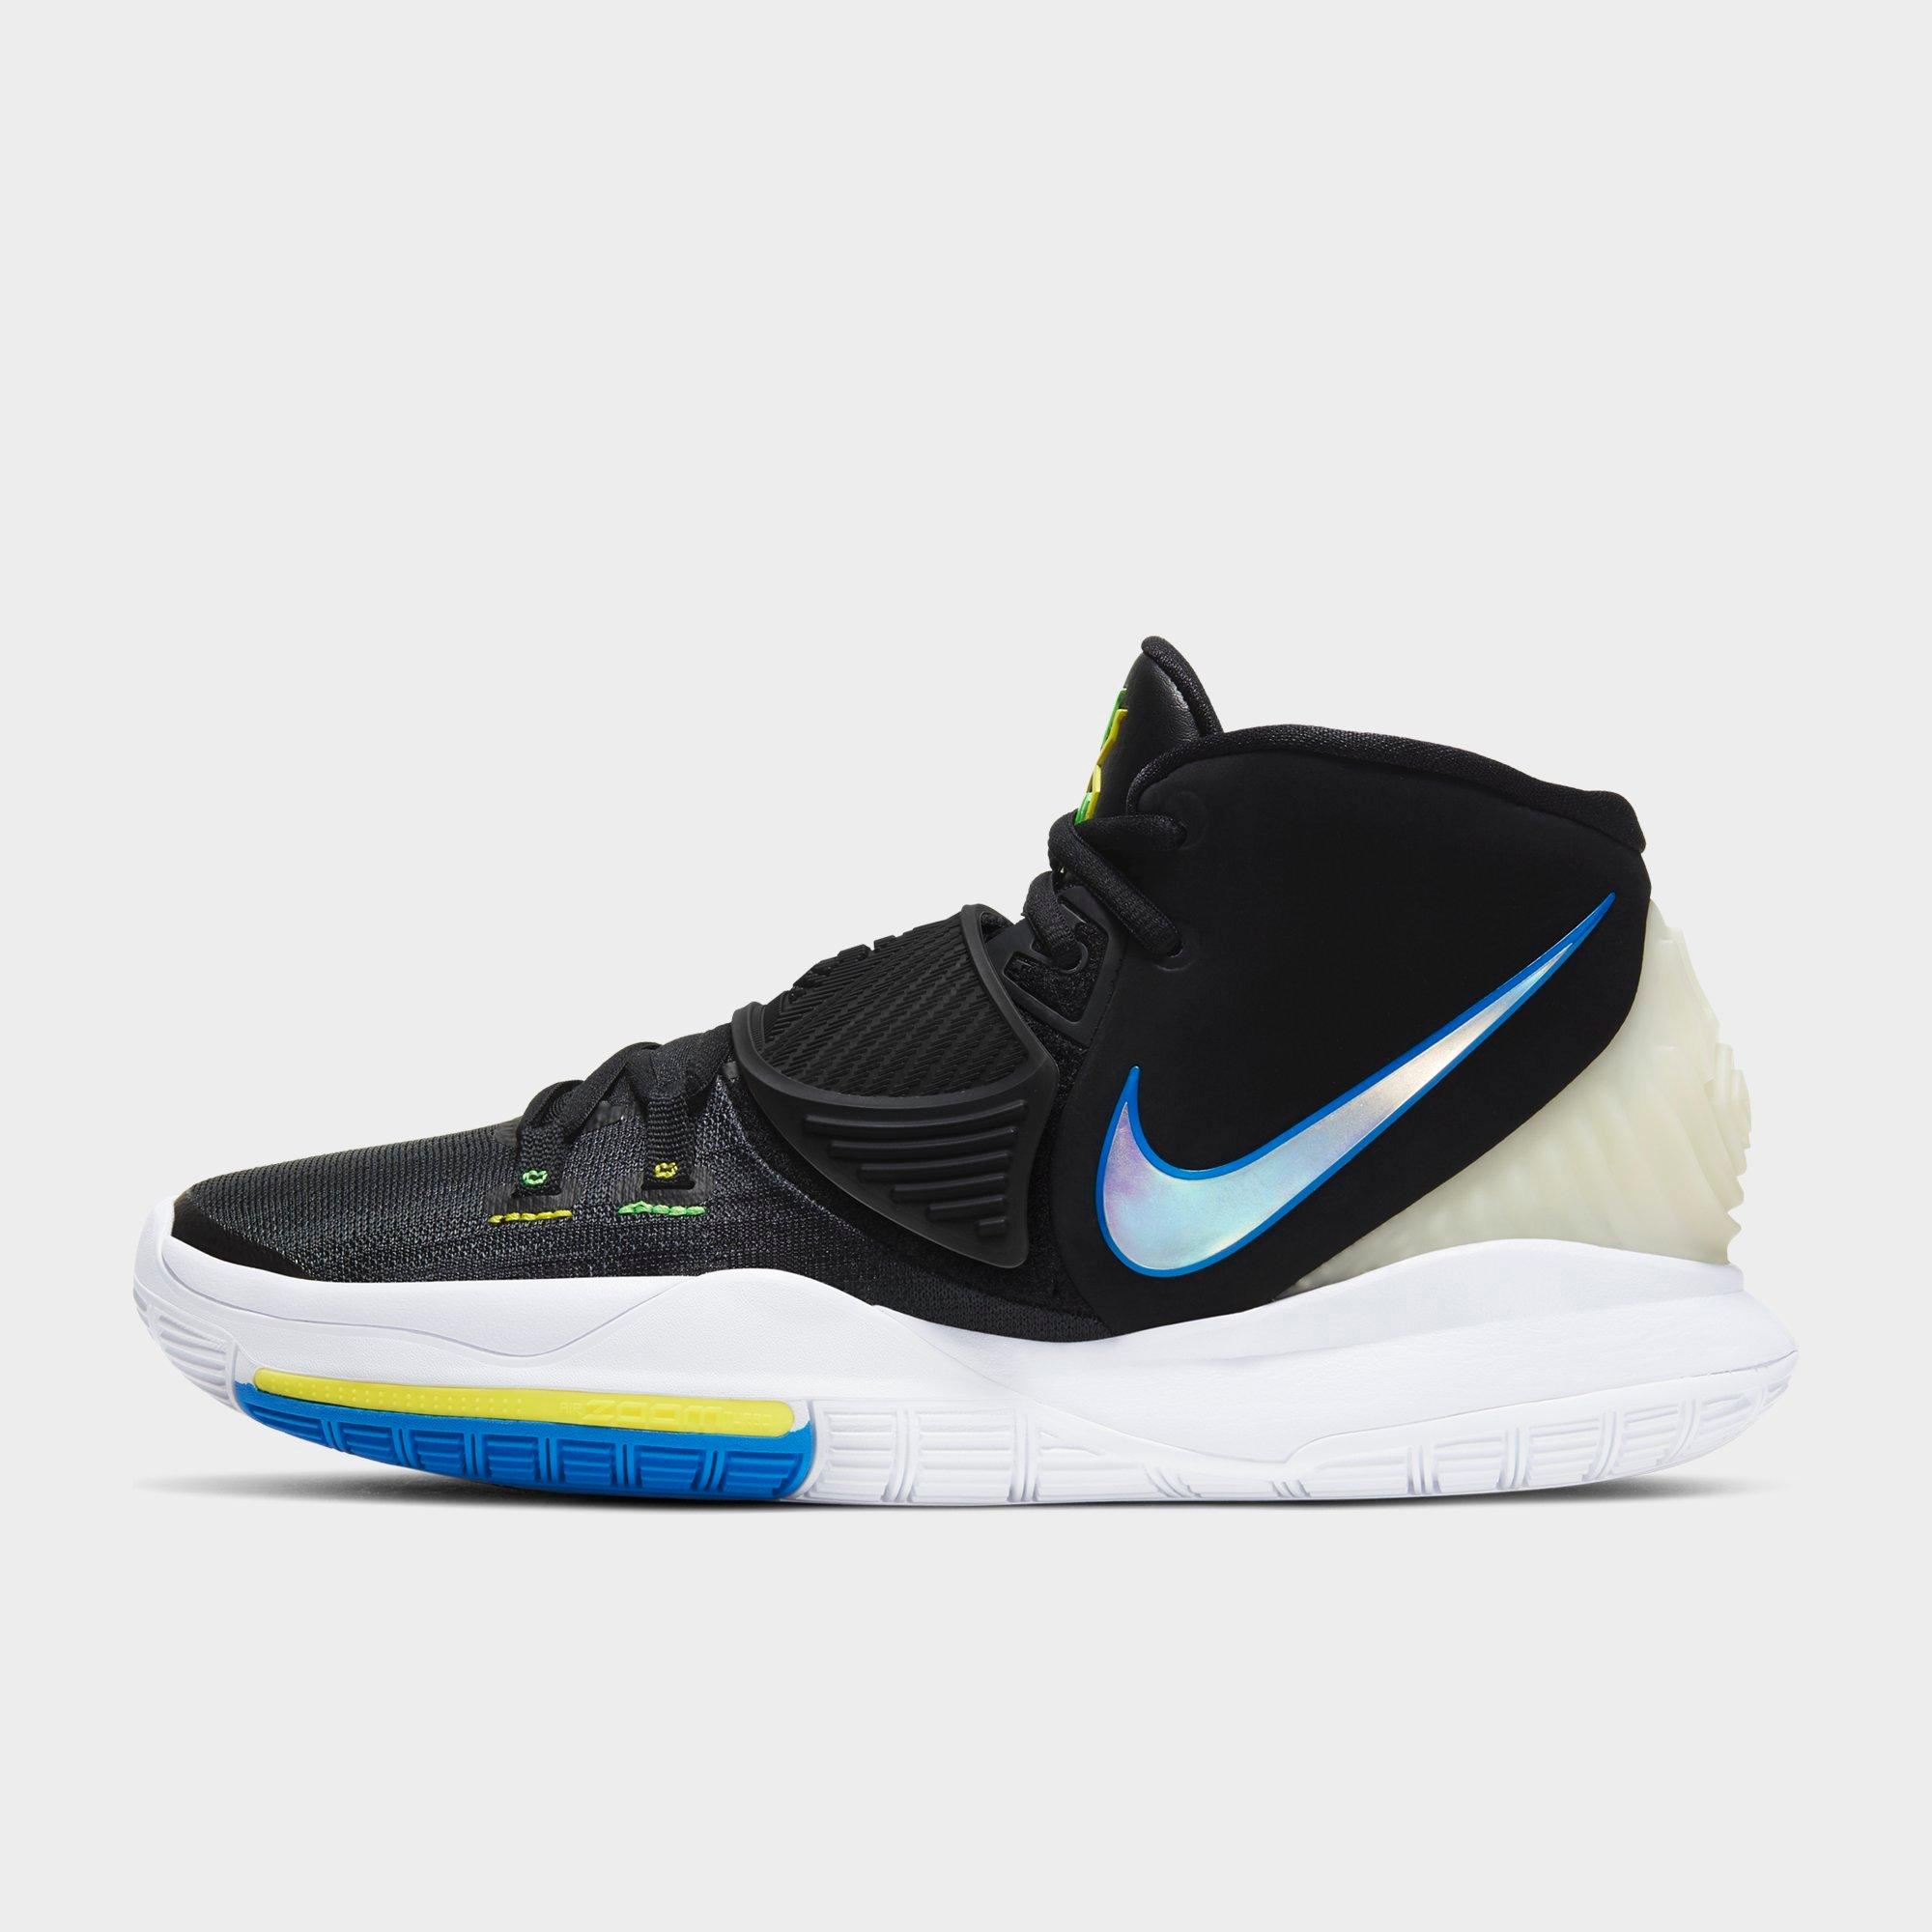 kyrie irving shoes nike outlet